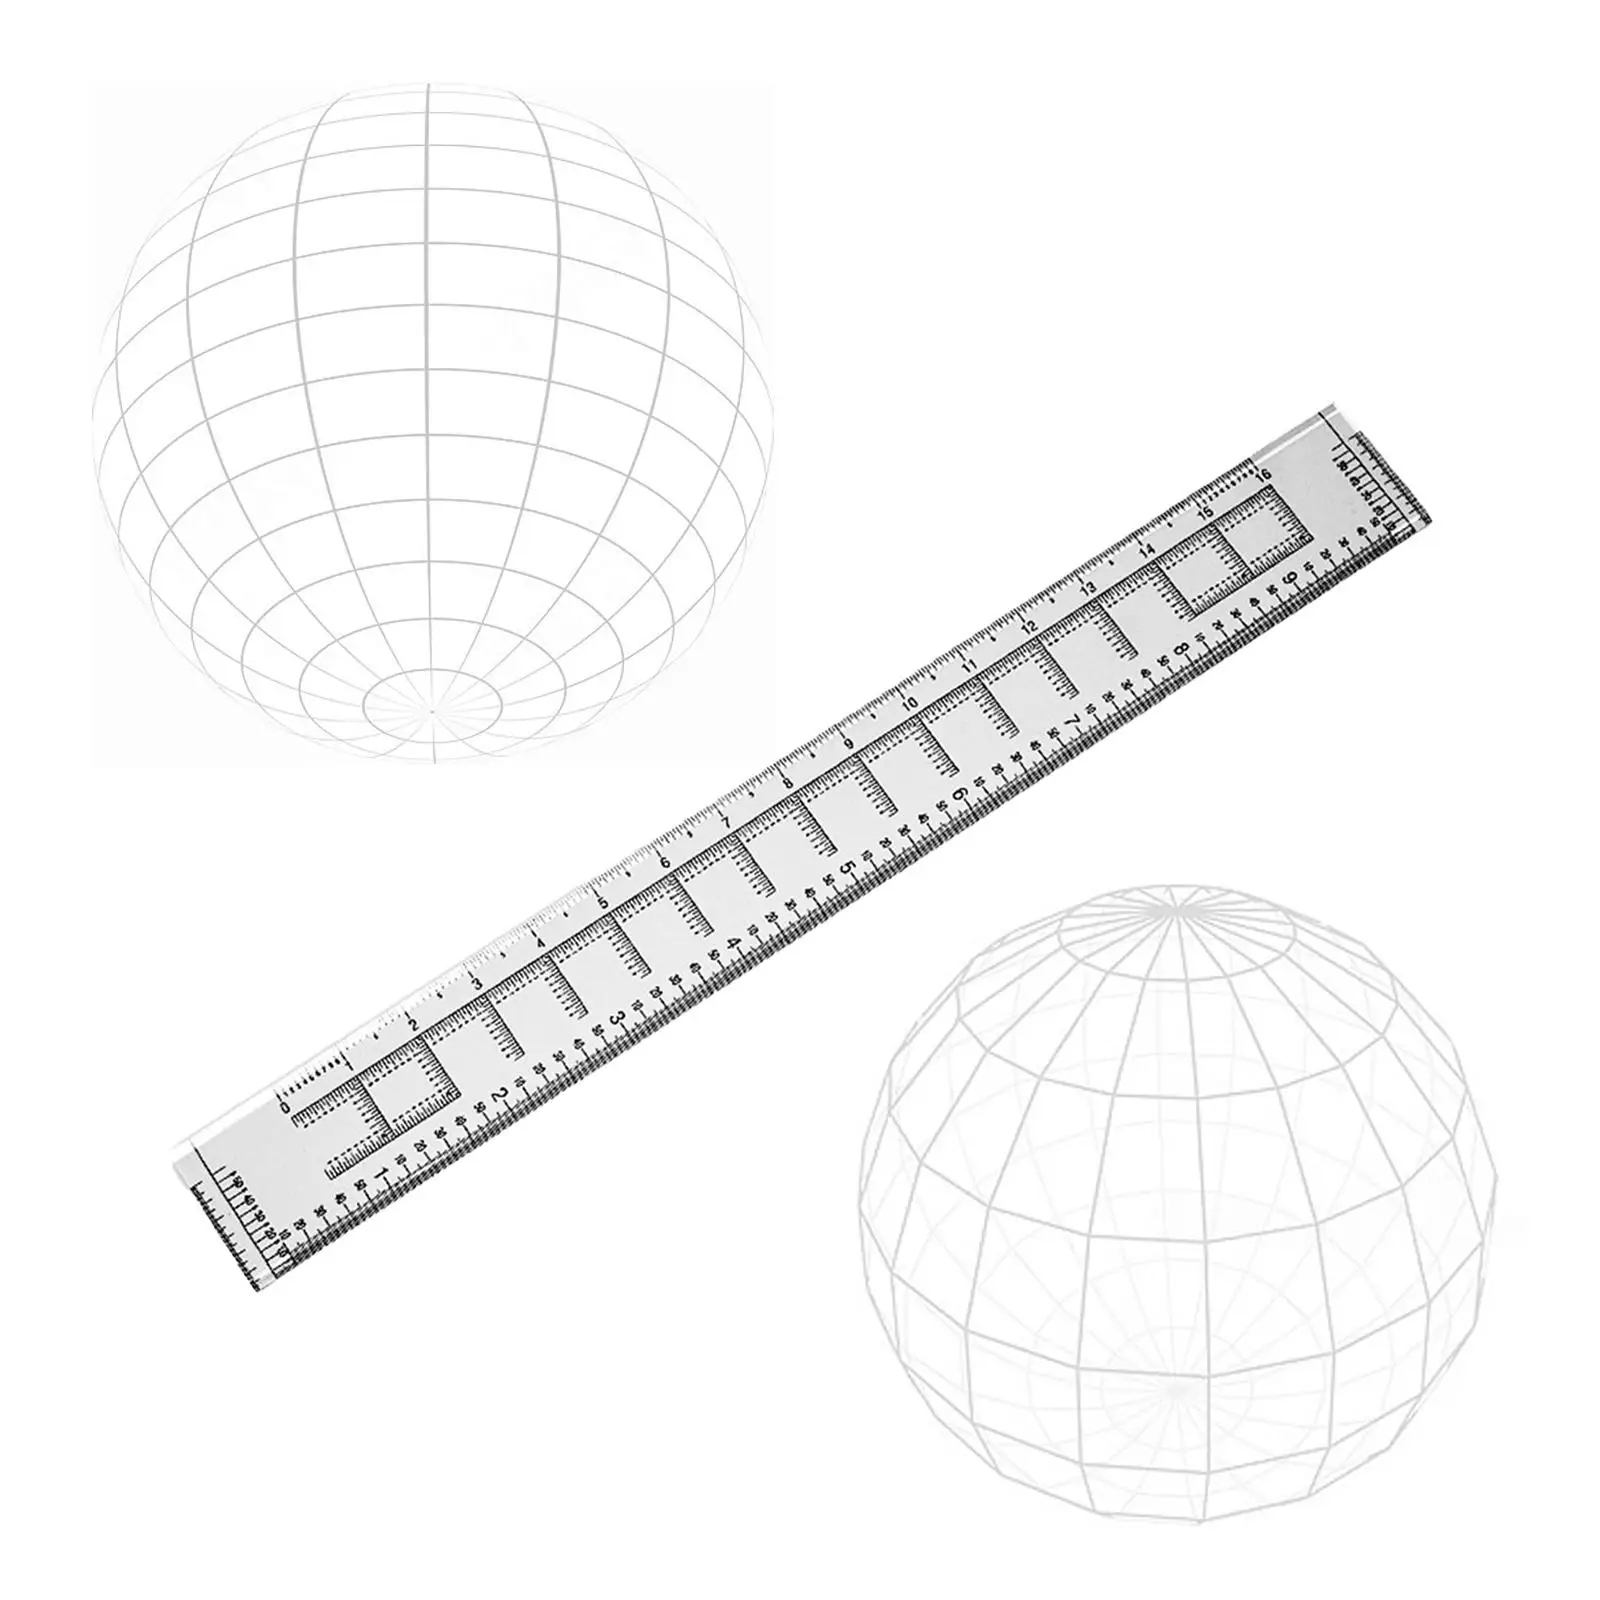 1:50000 Grid Coordinate Reader Coordinate Scale Ruler for Outdoor Map Reading Working Traveling Land Navigation Topographical